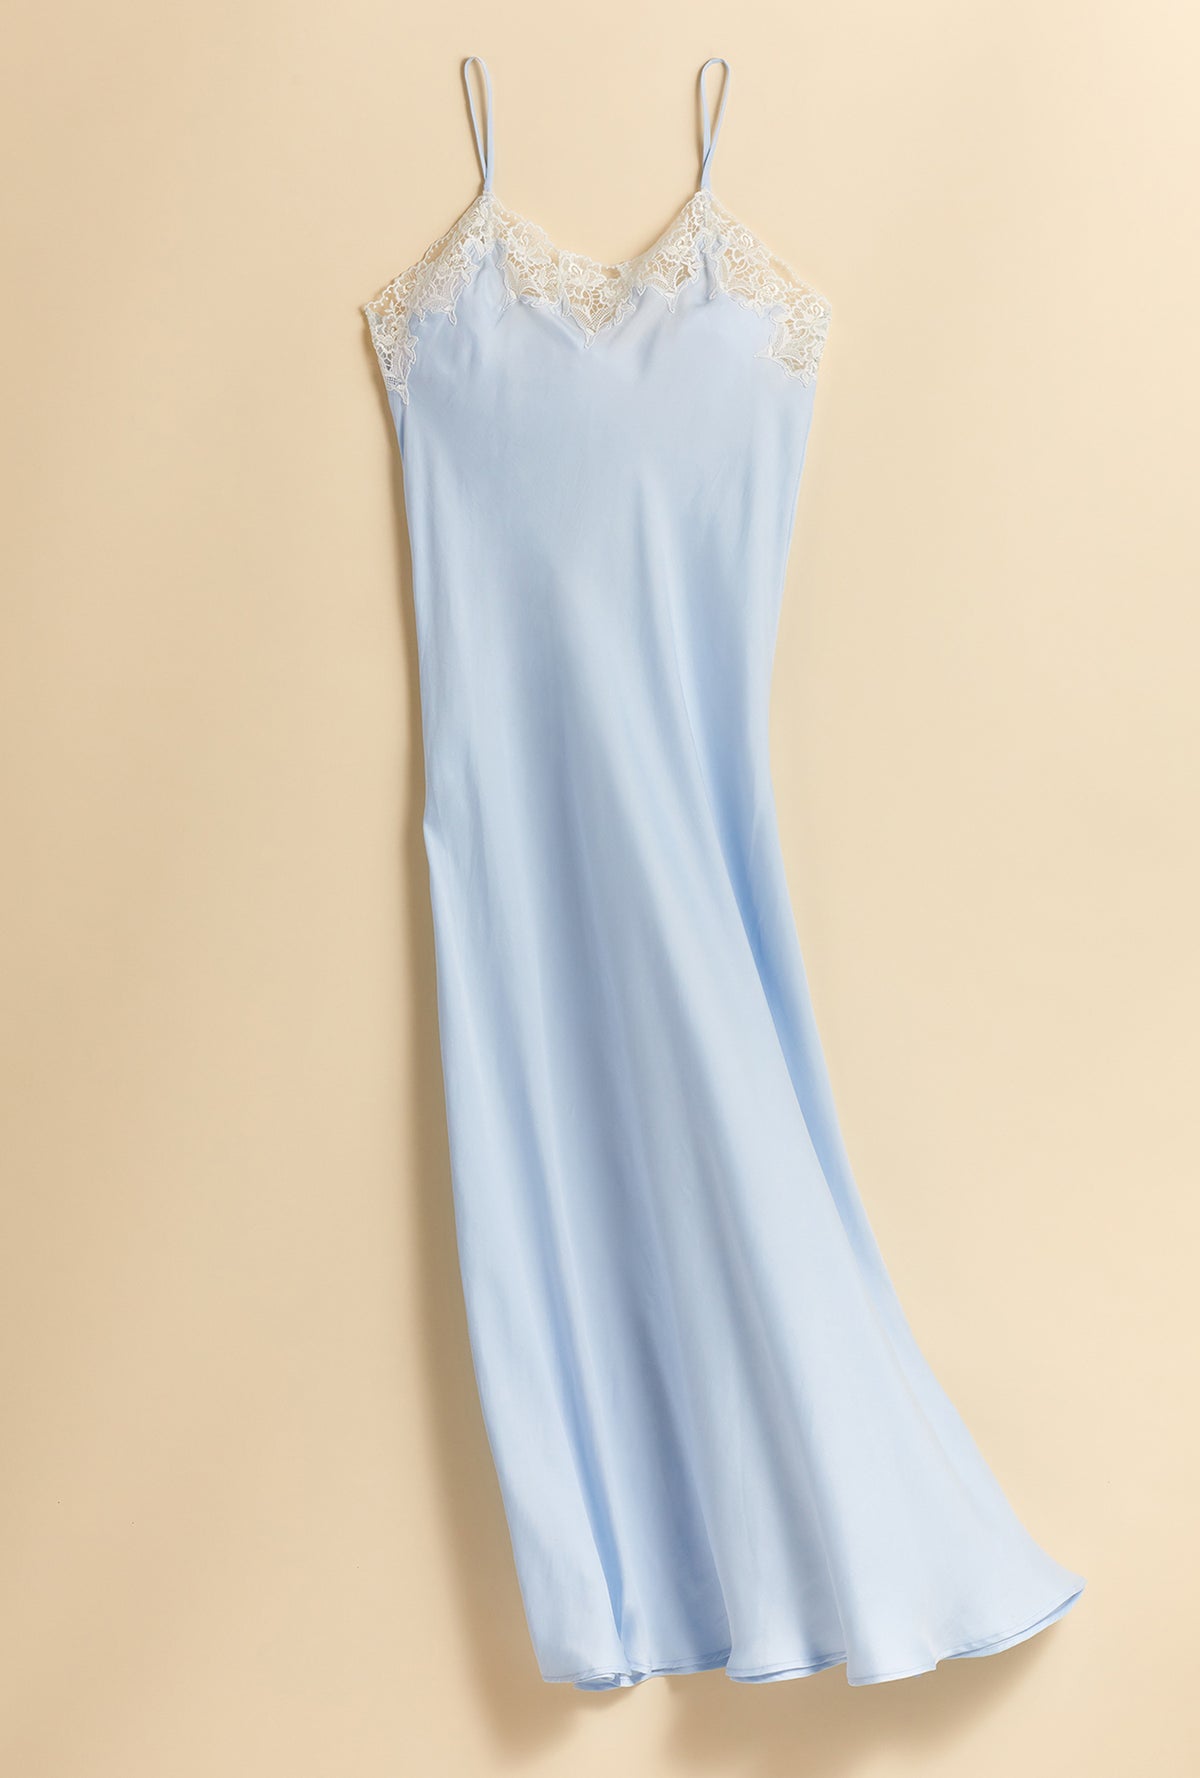 A lady wearing a blue sleeveless satin gown.A lady wearing blue sleeveless santorini satin gown.